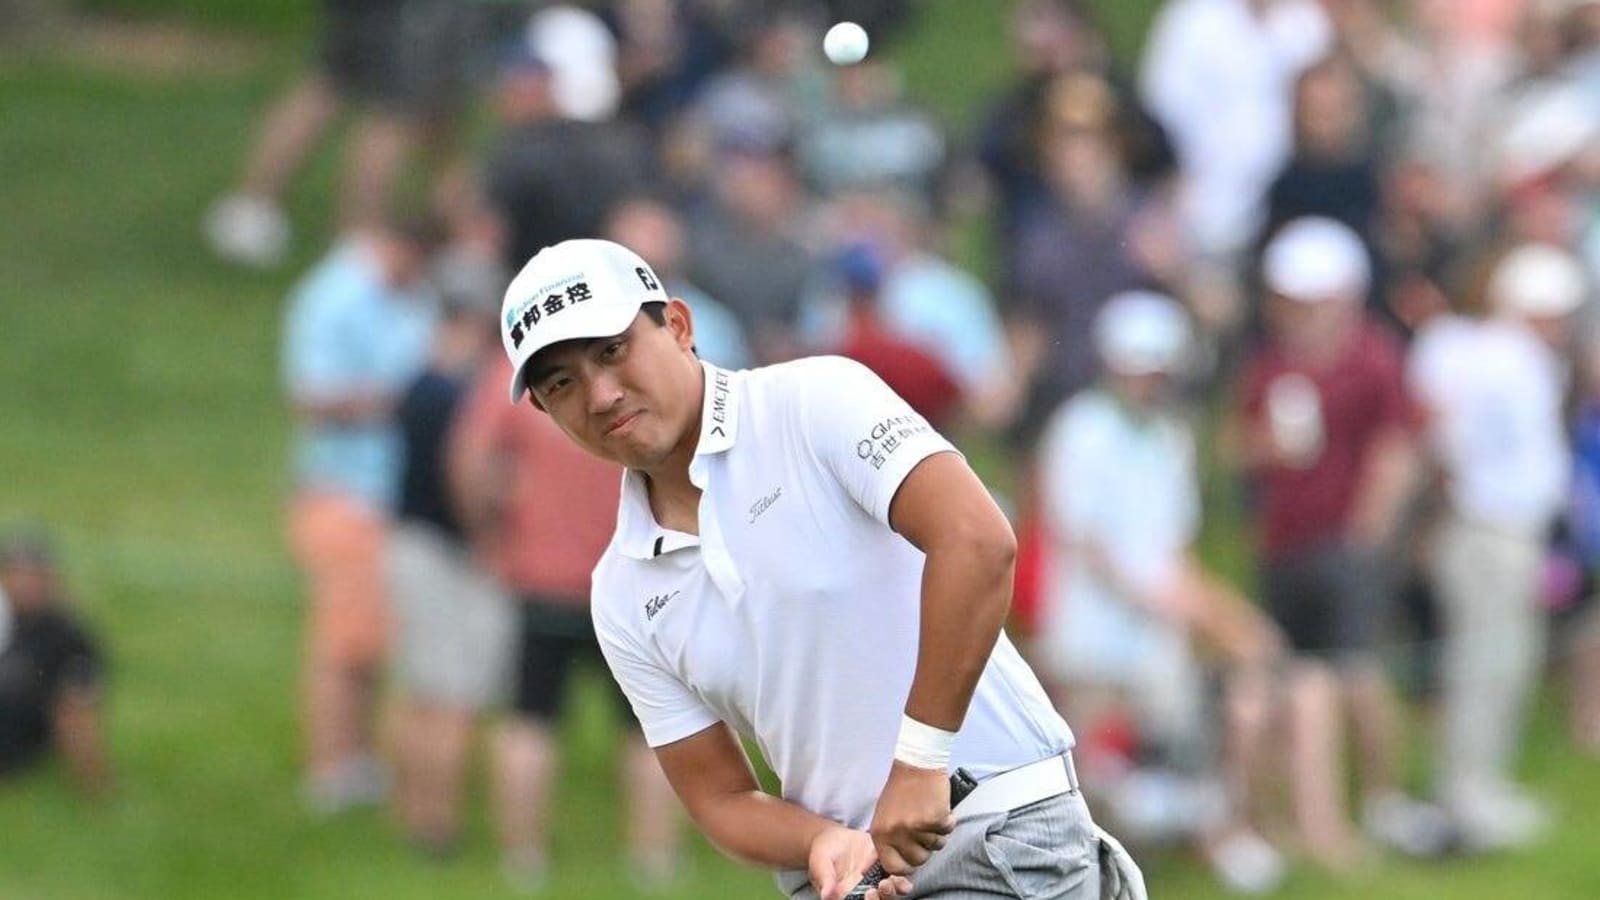 C.T. Pan (66) takes 2-shot lead at Canadian Open